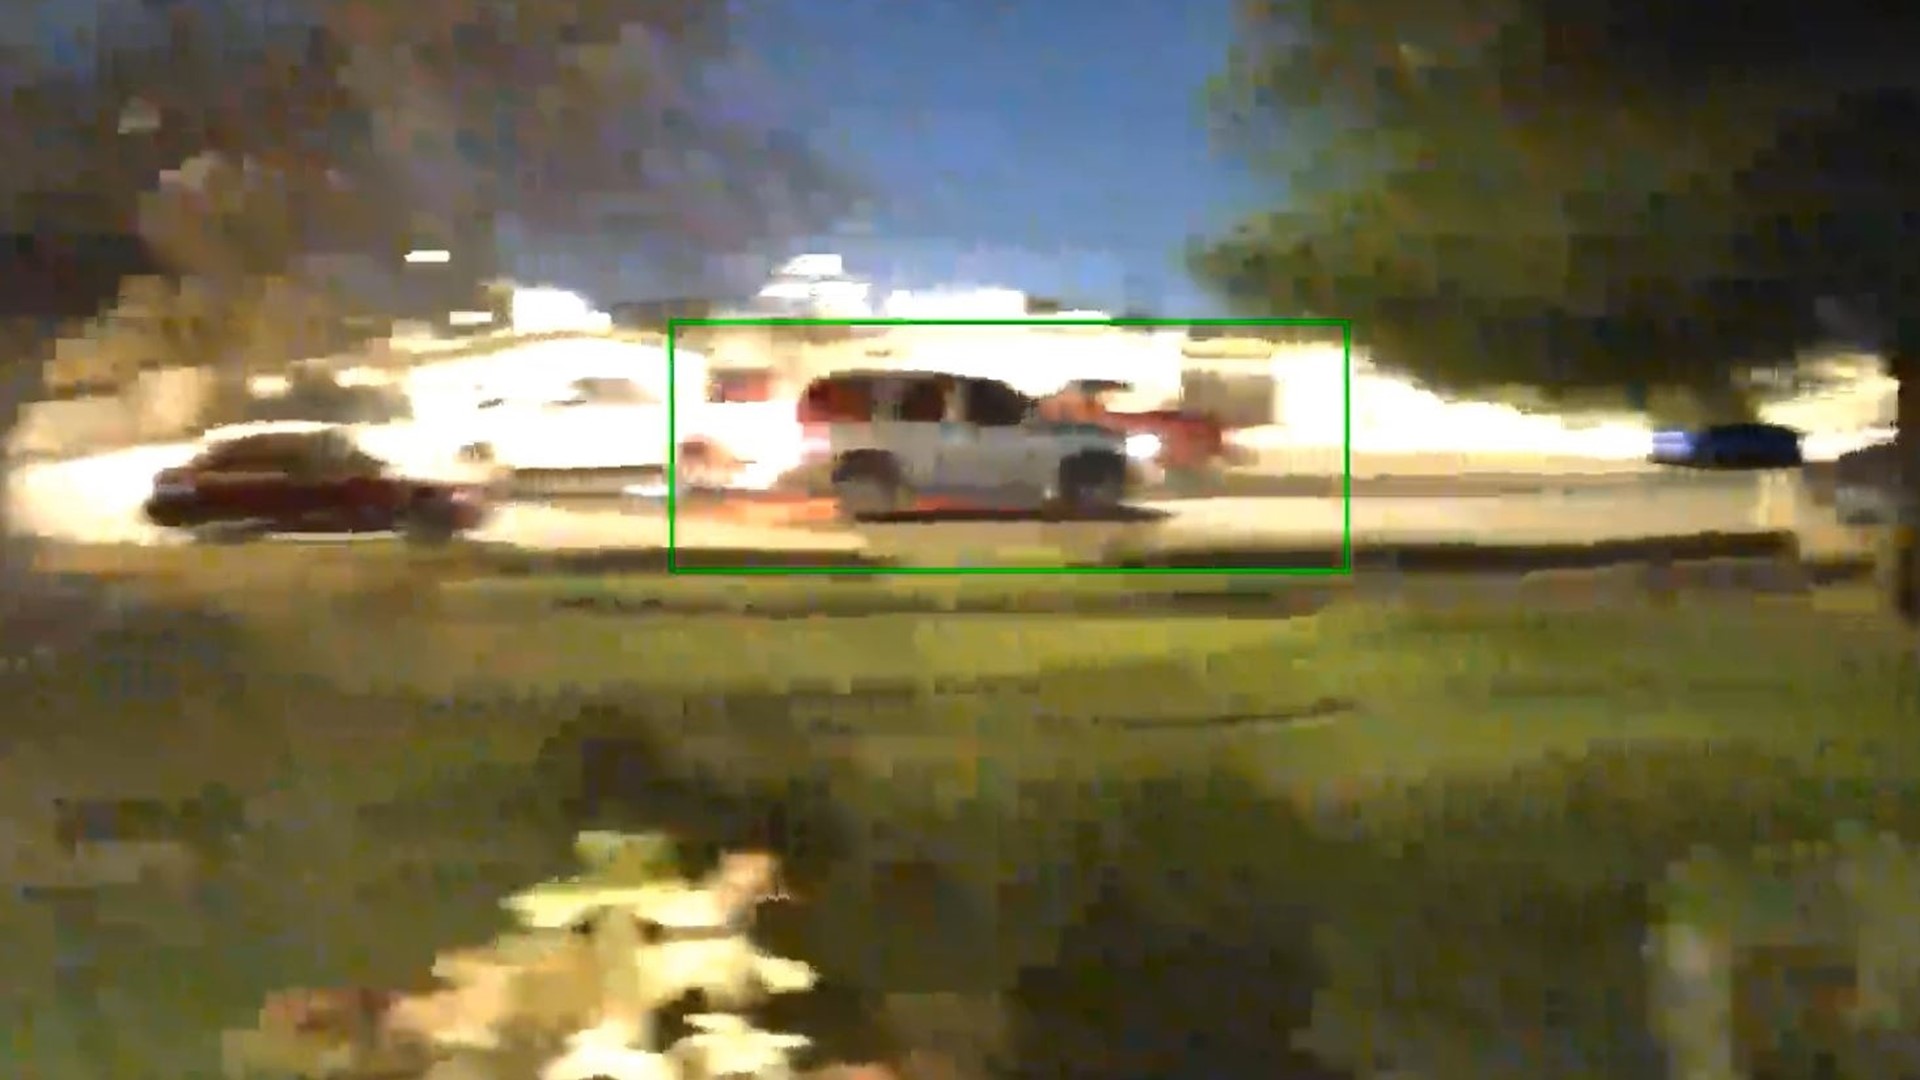 Phoenix PD release video of vehicle involved in shooting at 40th Avenue and Van Buren Street.